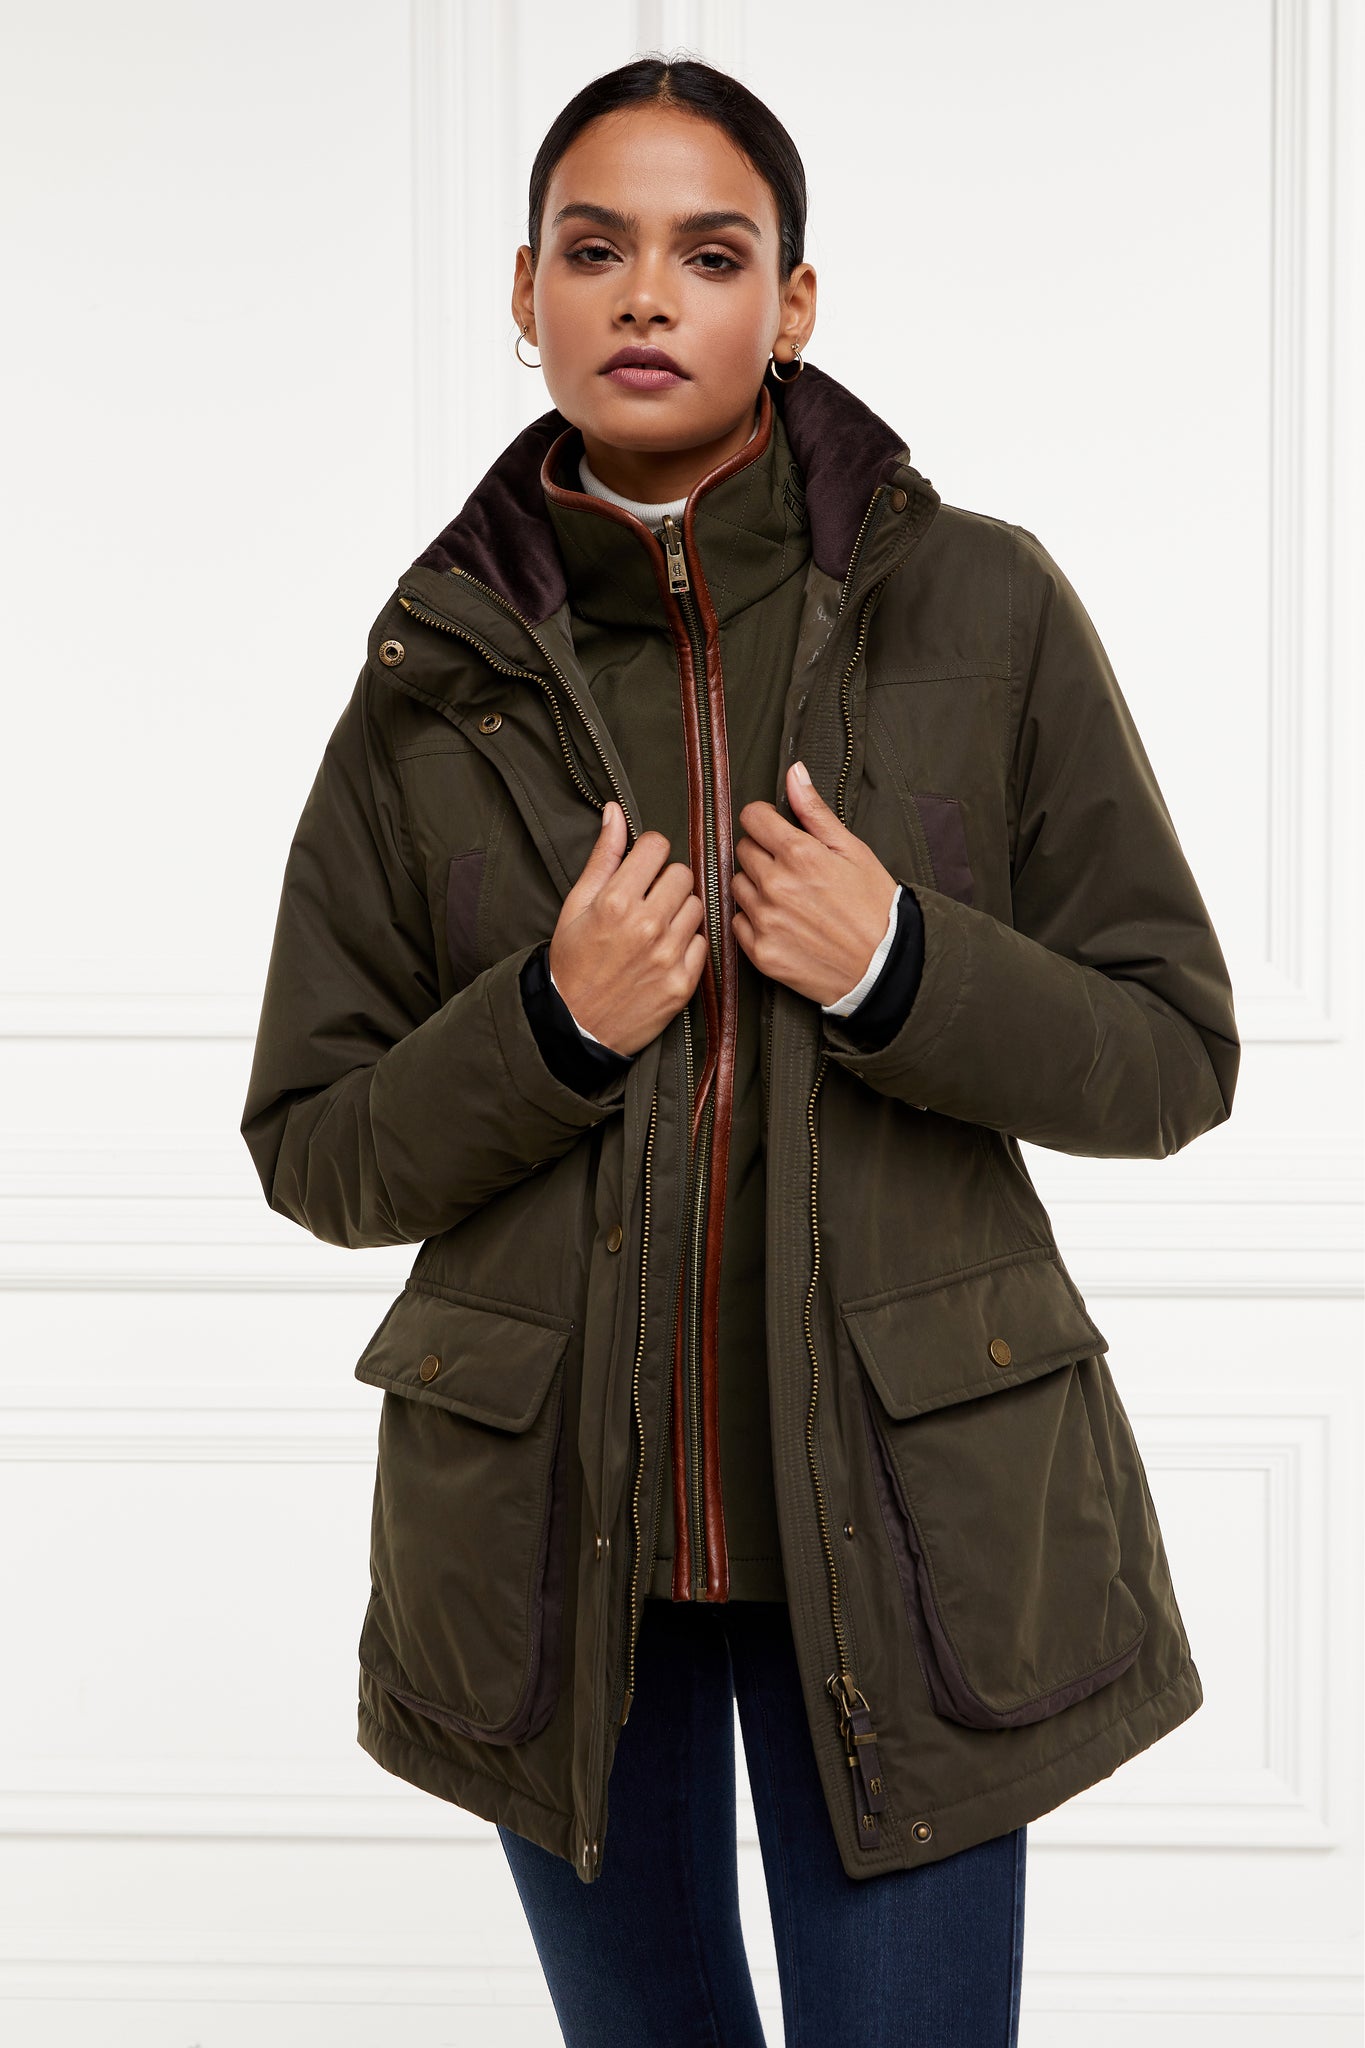 multiway coat in khaki that works as a 3 in 1 a waterproof outer coat with stowaway hood and deep pockets and black jersey storm cuffs and a fleece gilet inner with tan leather trims can be worn together or separately